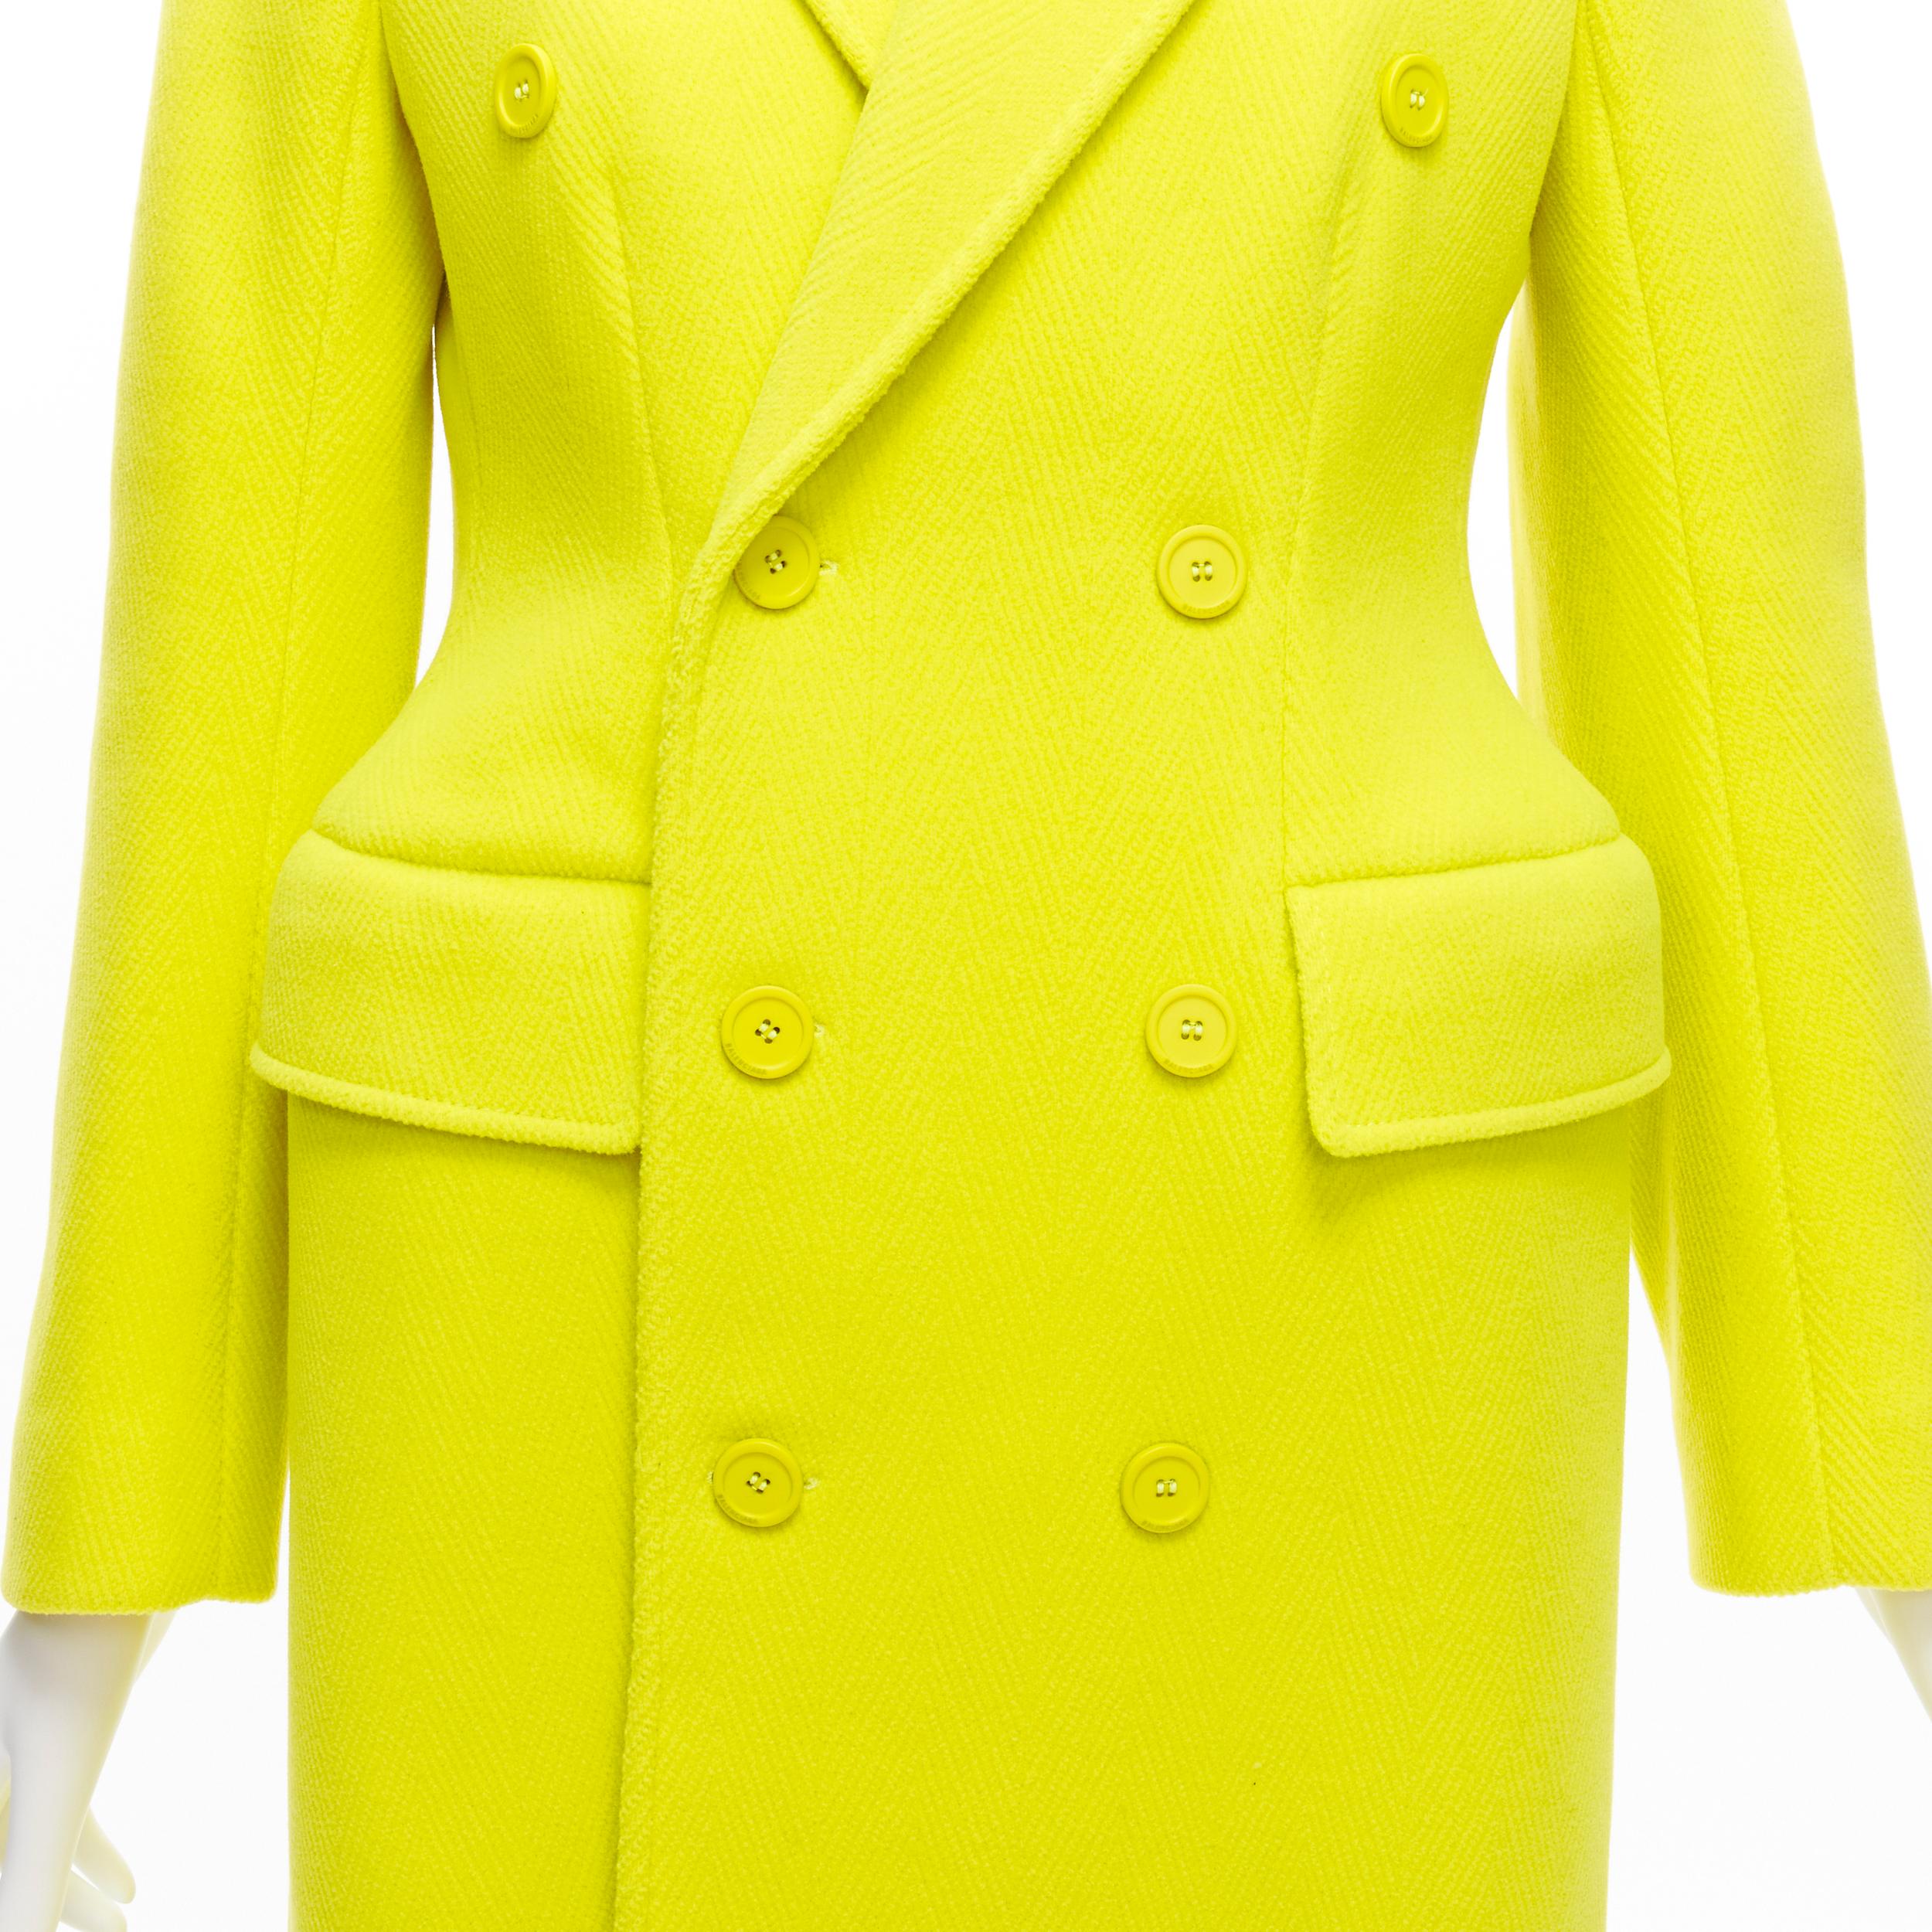 new BALENCIAGA 2019 Hourglass fluo yellow virgin wool double breasted peplum coat FR36 S
Reference: TGAS/D00139
Brand: Balenciaga
Designer: Demna
Model: Hourglass
Collection: 2019
Material: Virgin Wool, Polyamide
Color: Neon Yellow
Pattern: